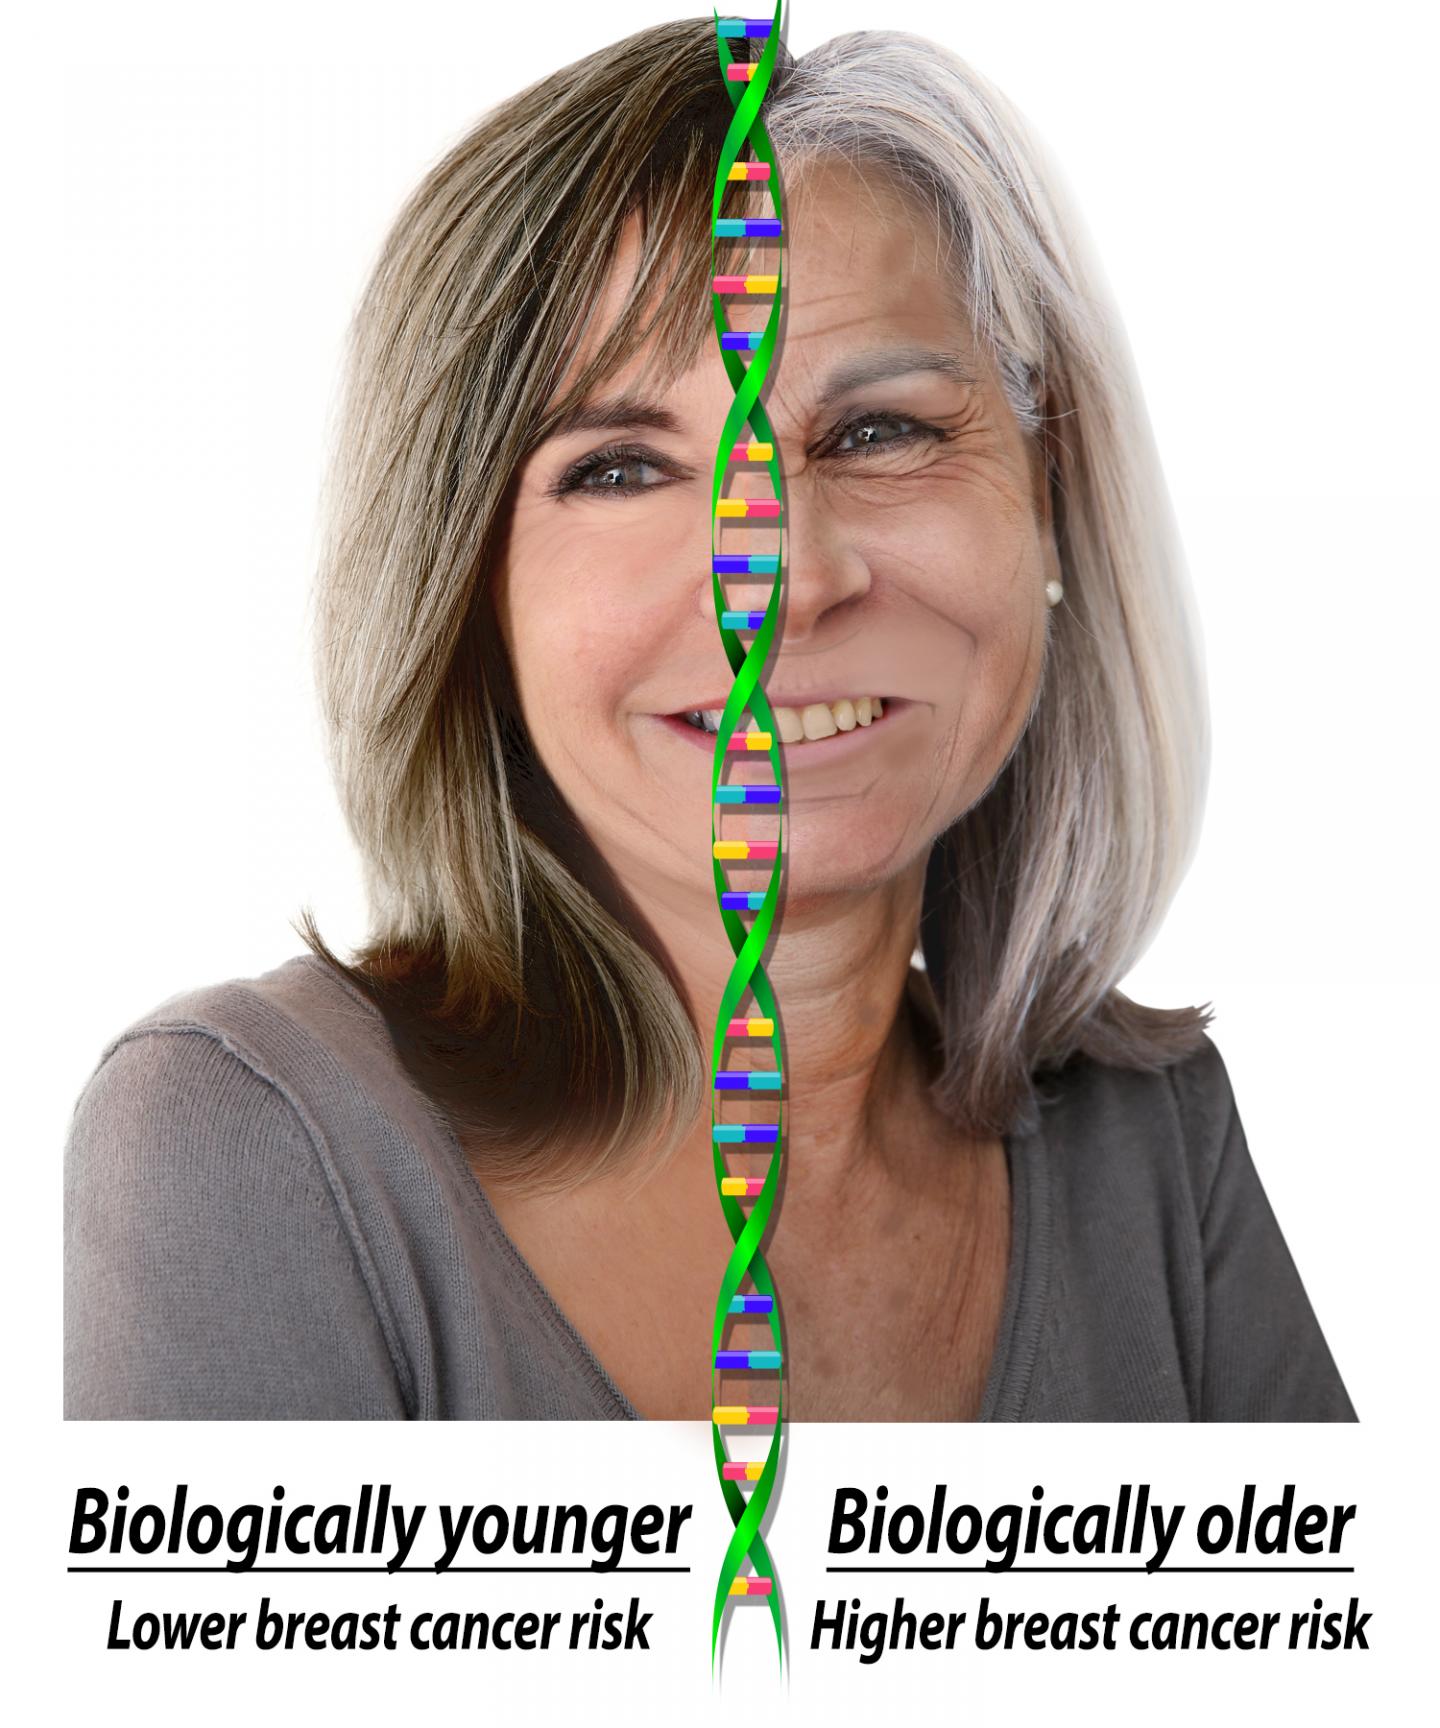 A Graphical Representation of Biologic and Chronologic Age (IMAGE)